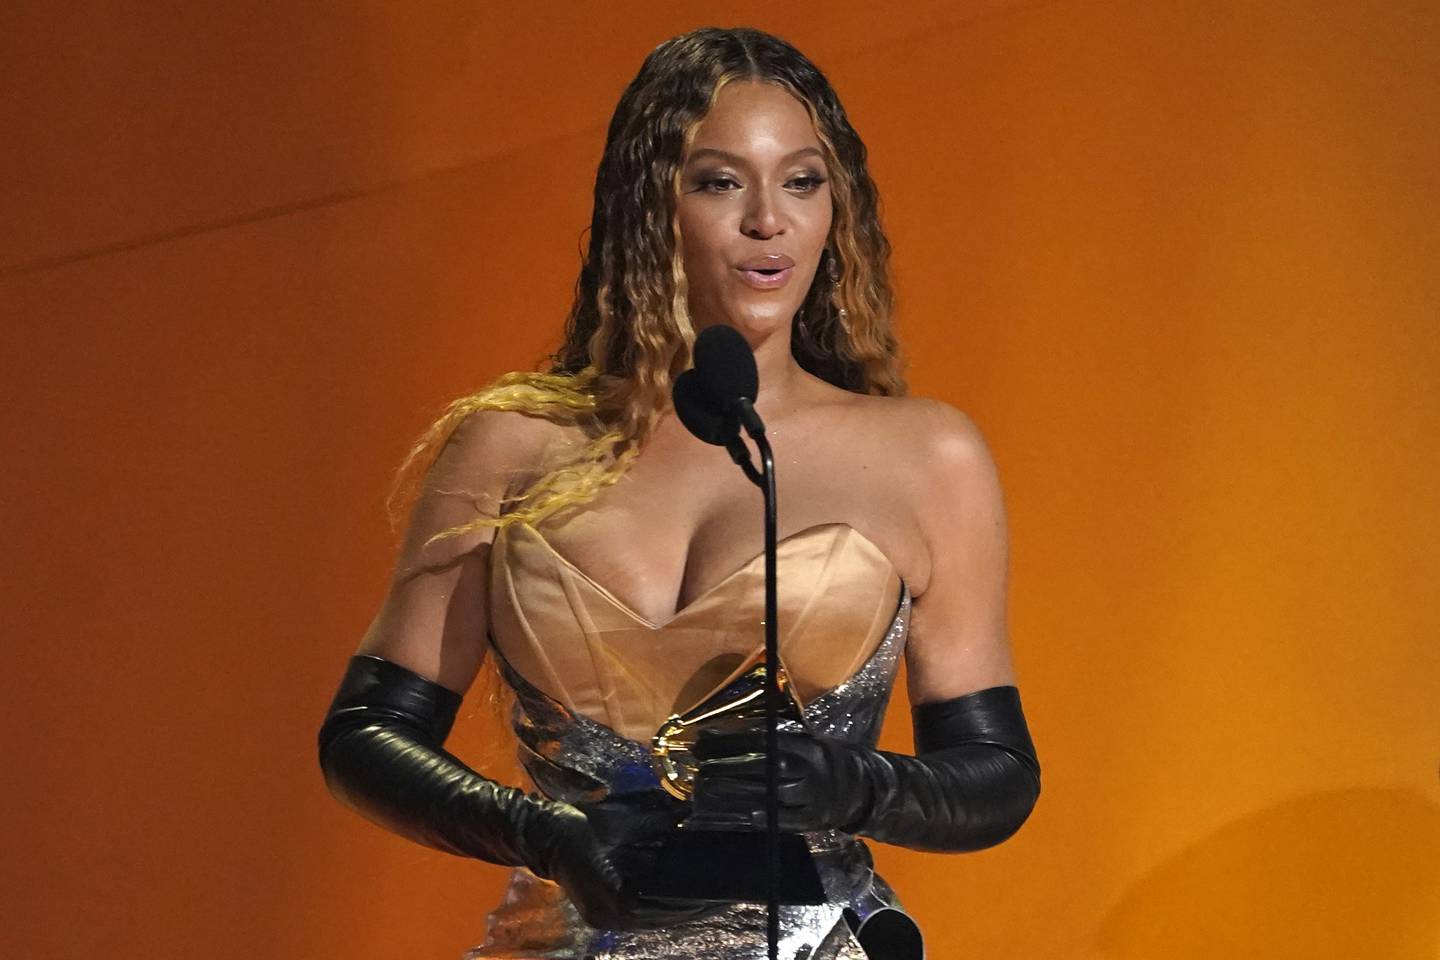 Beyonce accepts the award for best dance/electronic music album for "Renaissance" at the 65th annual Grammy Awards on  Feb. 5, 2023, in Los Angeles. Tickets for Beyoncé’s “Renaissance” world tour which kicks off in Stockholm in May have been sold out “after a high ticket pressure." A new second concert in the Swedish capital was announced Tuesday when the sale started. The concerts are part of her highly anticipated tour and it was her first single tour in five years. (AP Photo/Chris Pizzello)